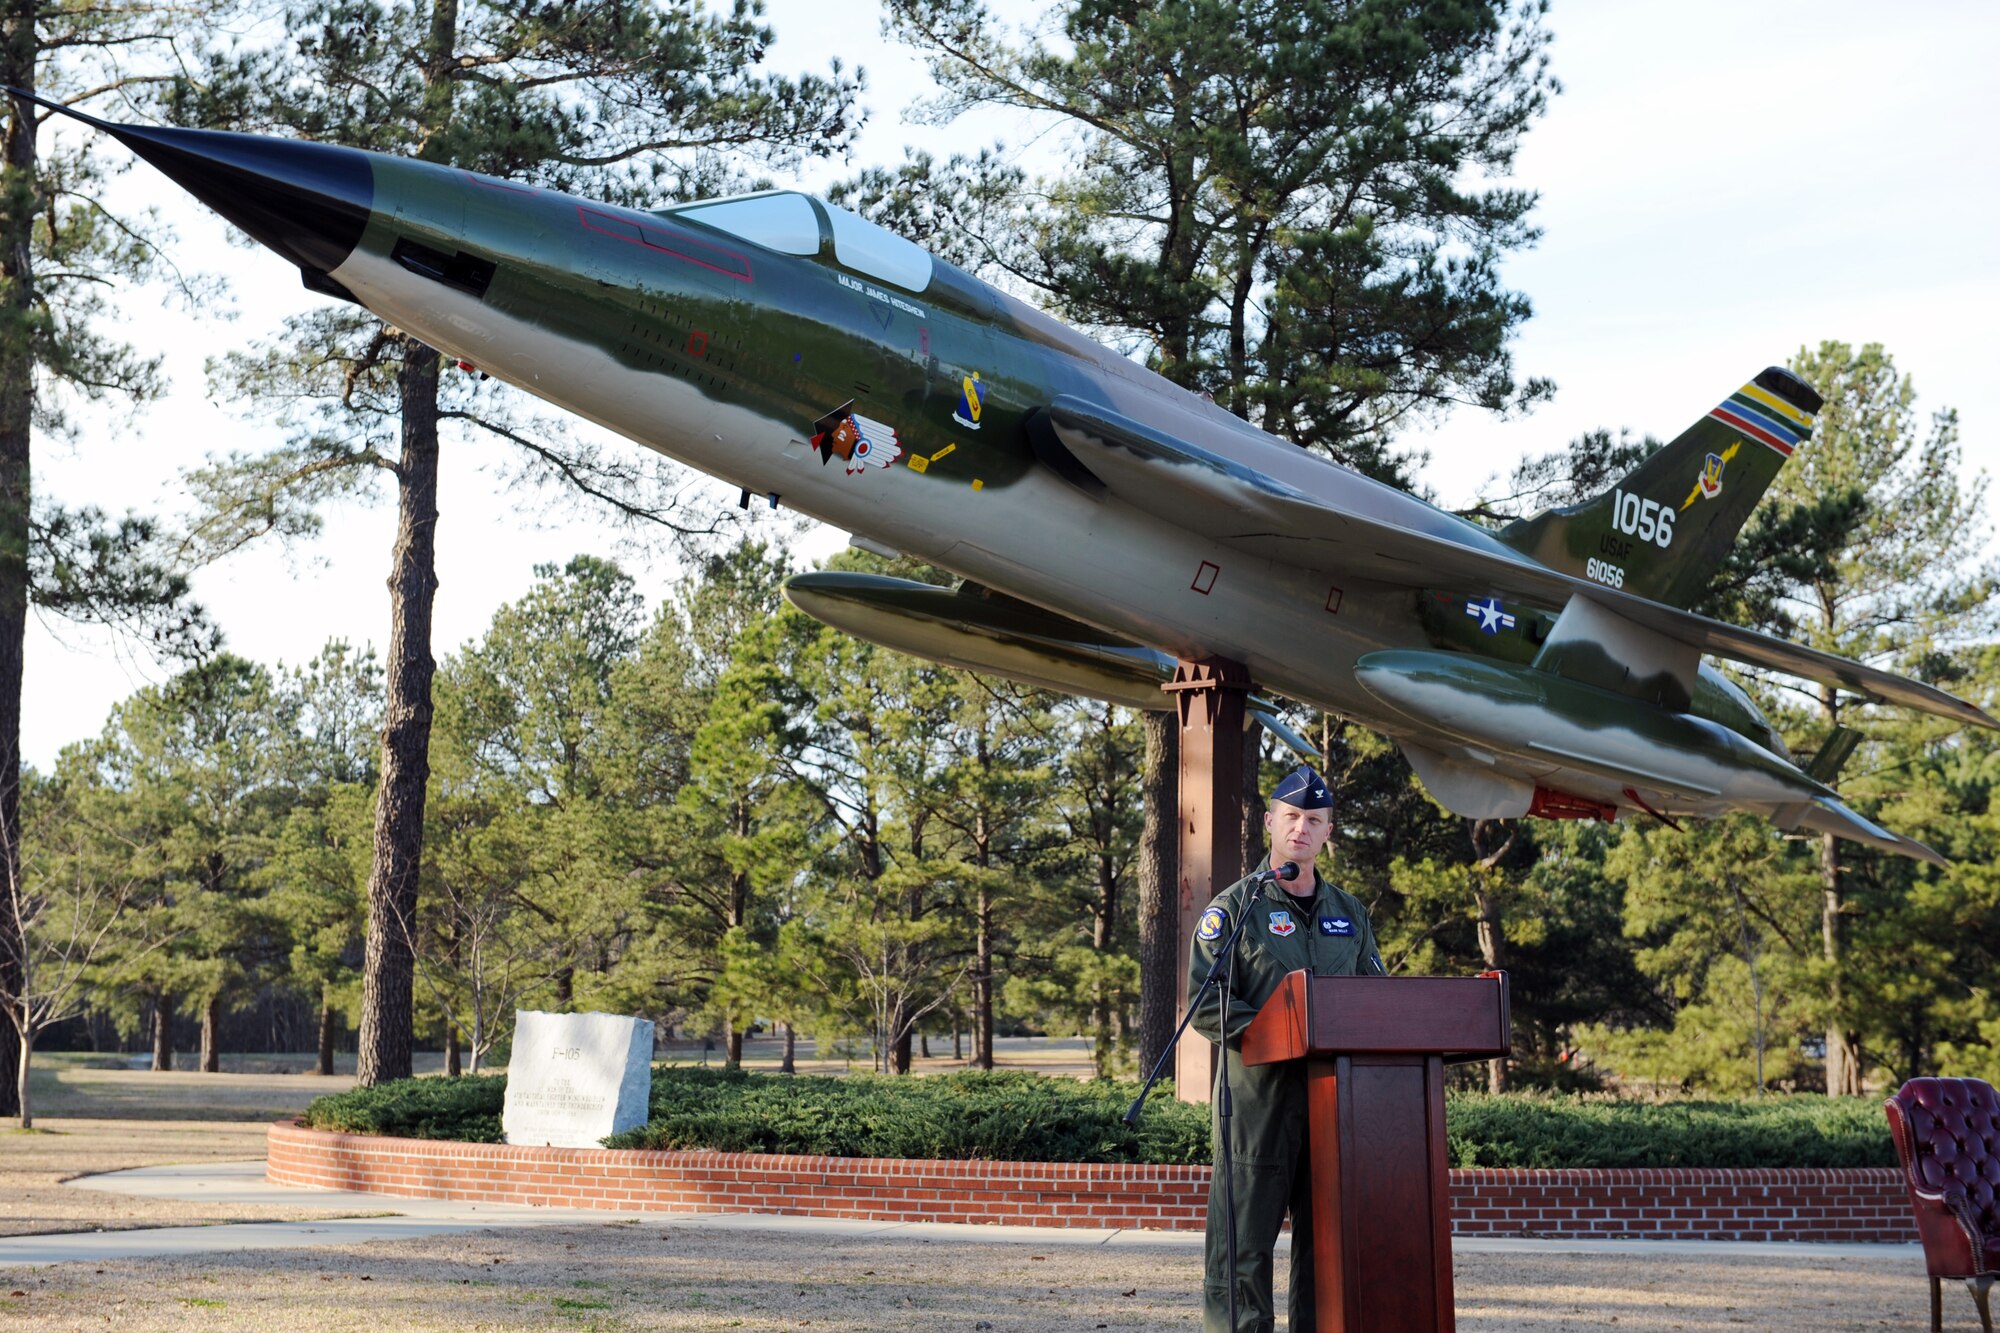 Colonel Mark D, Kelly, 4th Fighter Wing commander, thanks everyone for attending the dedication ceremony honoring Col. James Hiteshaw on Seymour Johnson Air Force Base, N.C., Feb. 13, 2009. The F-105 Thunderchief static display is dedicated in honor of Col. James Hiteshaw, 4th Fighter Wing aviator and Vietnam prisoner of war. (U.S. photo by Airman 1st Class Whitney Lambert)
